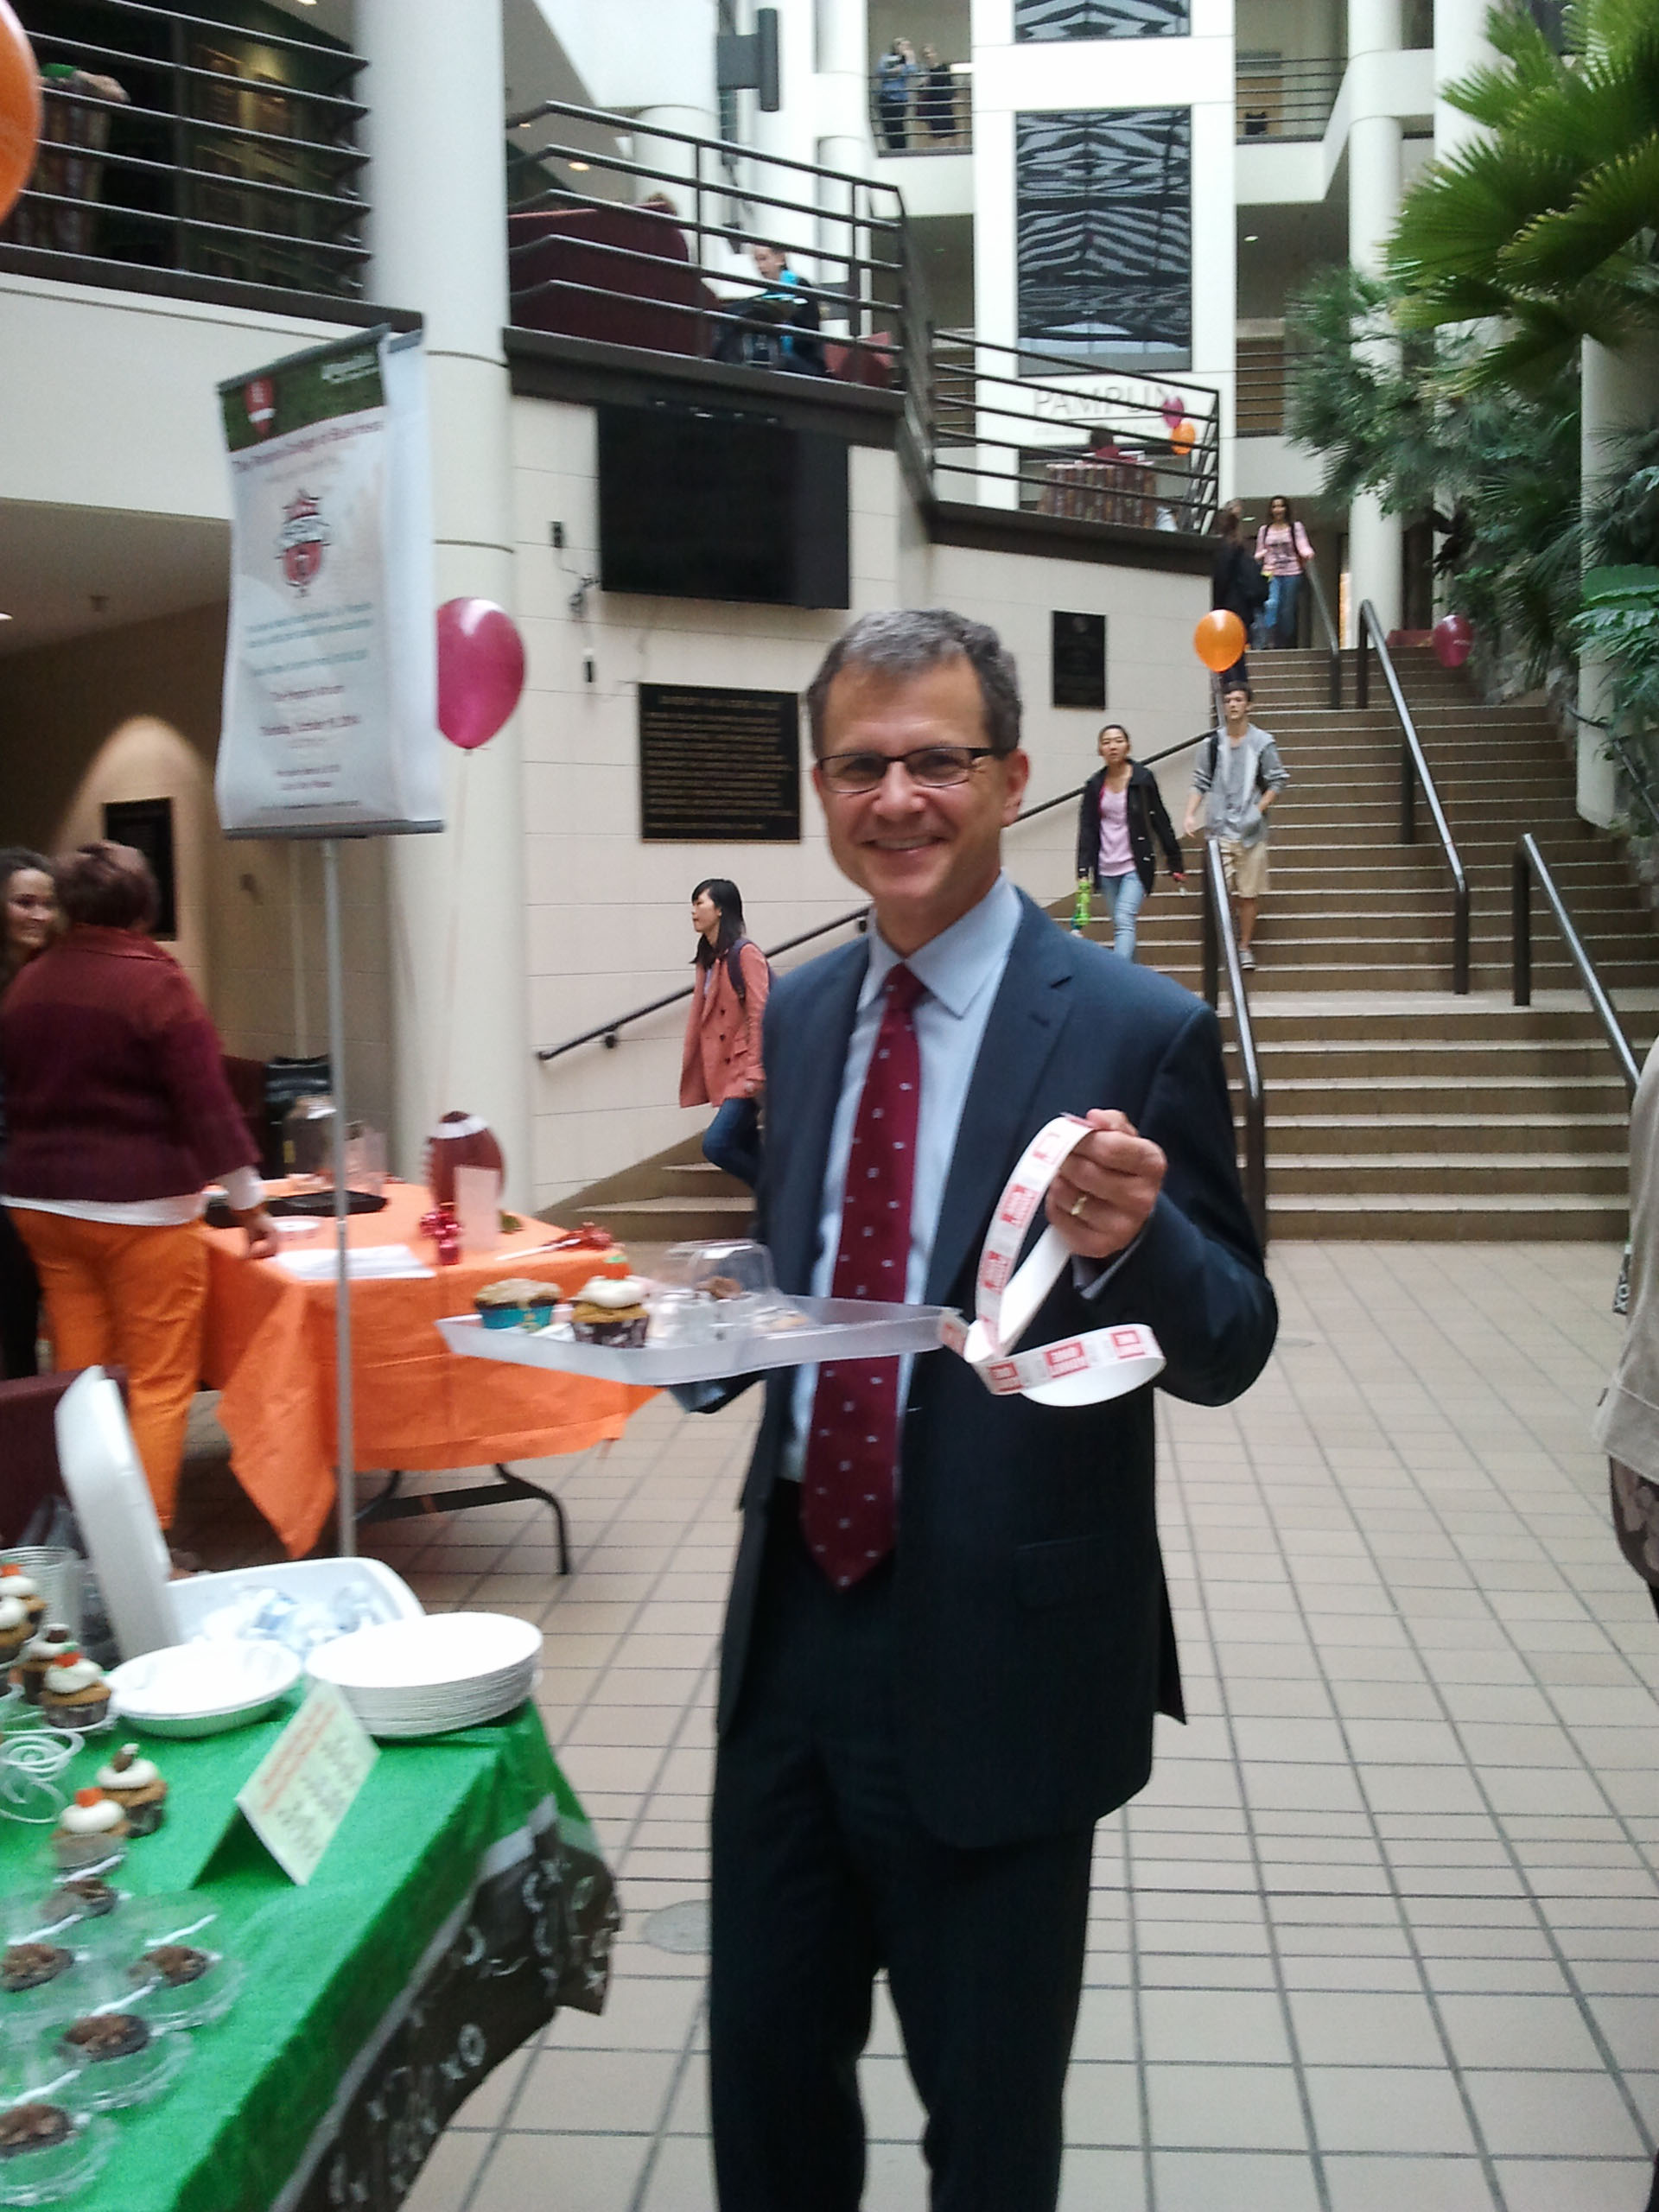 Pamplin dean Robert Sumichrast holds the tray of baked goods that he bought at one of the fundraisers the college's faculty and staff organized to support the CVC.